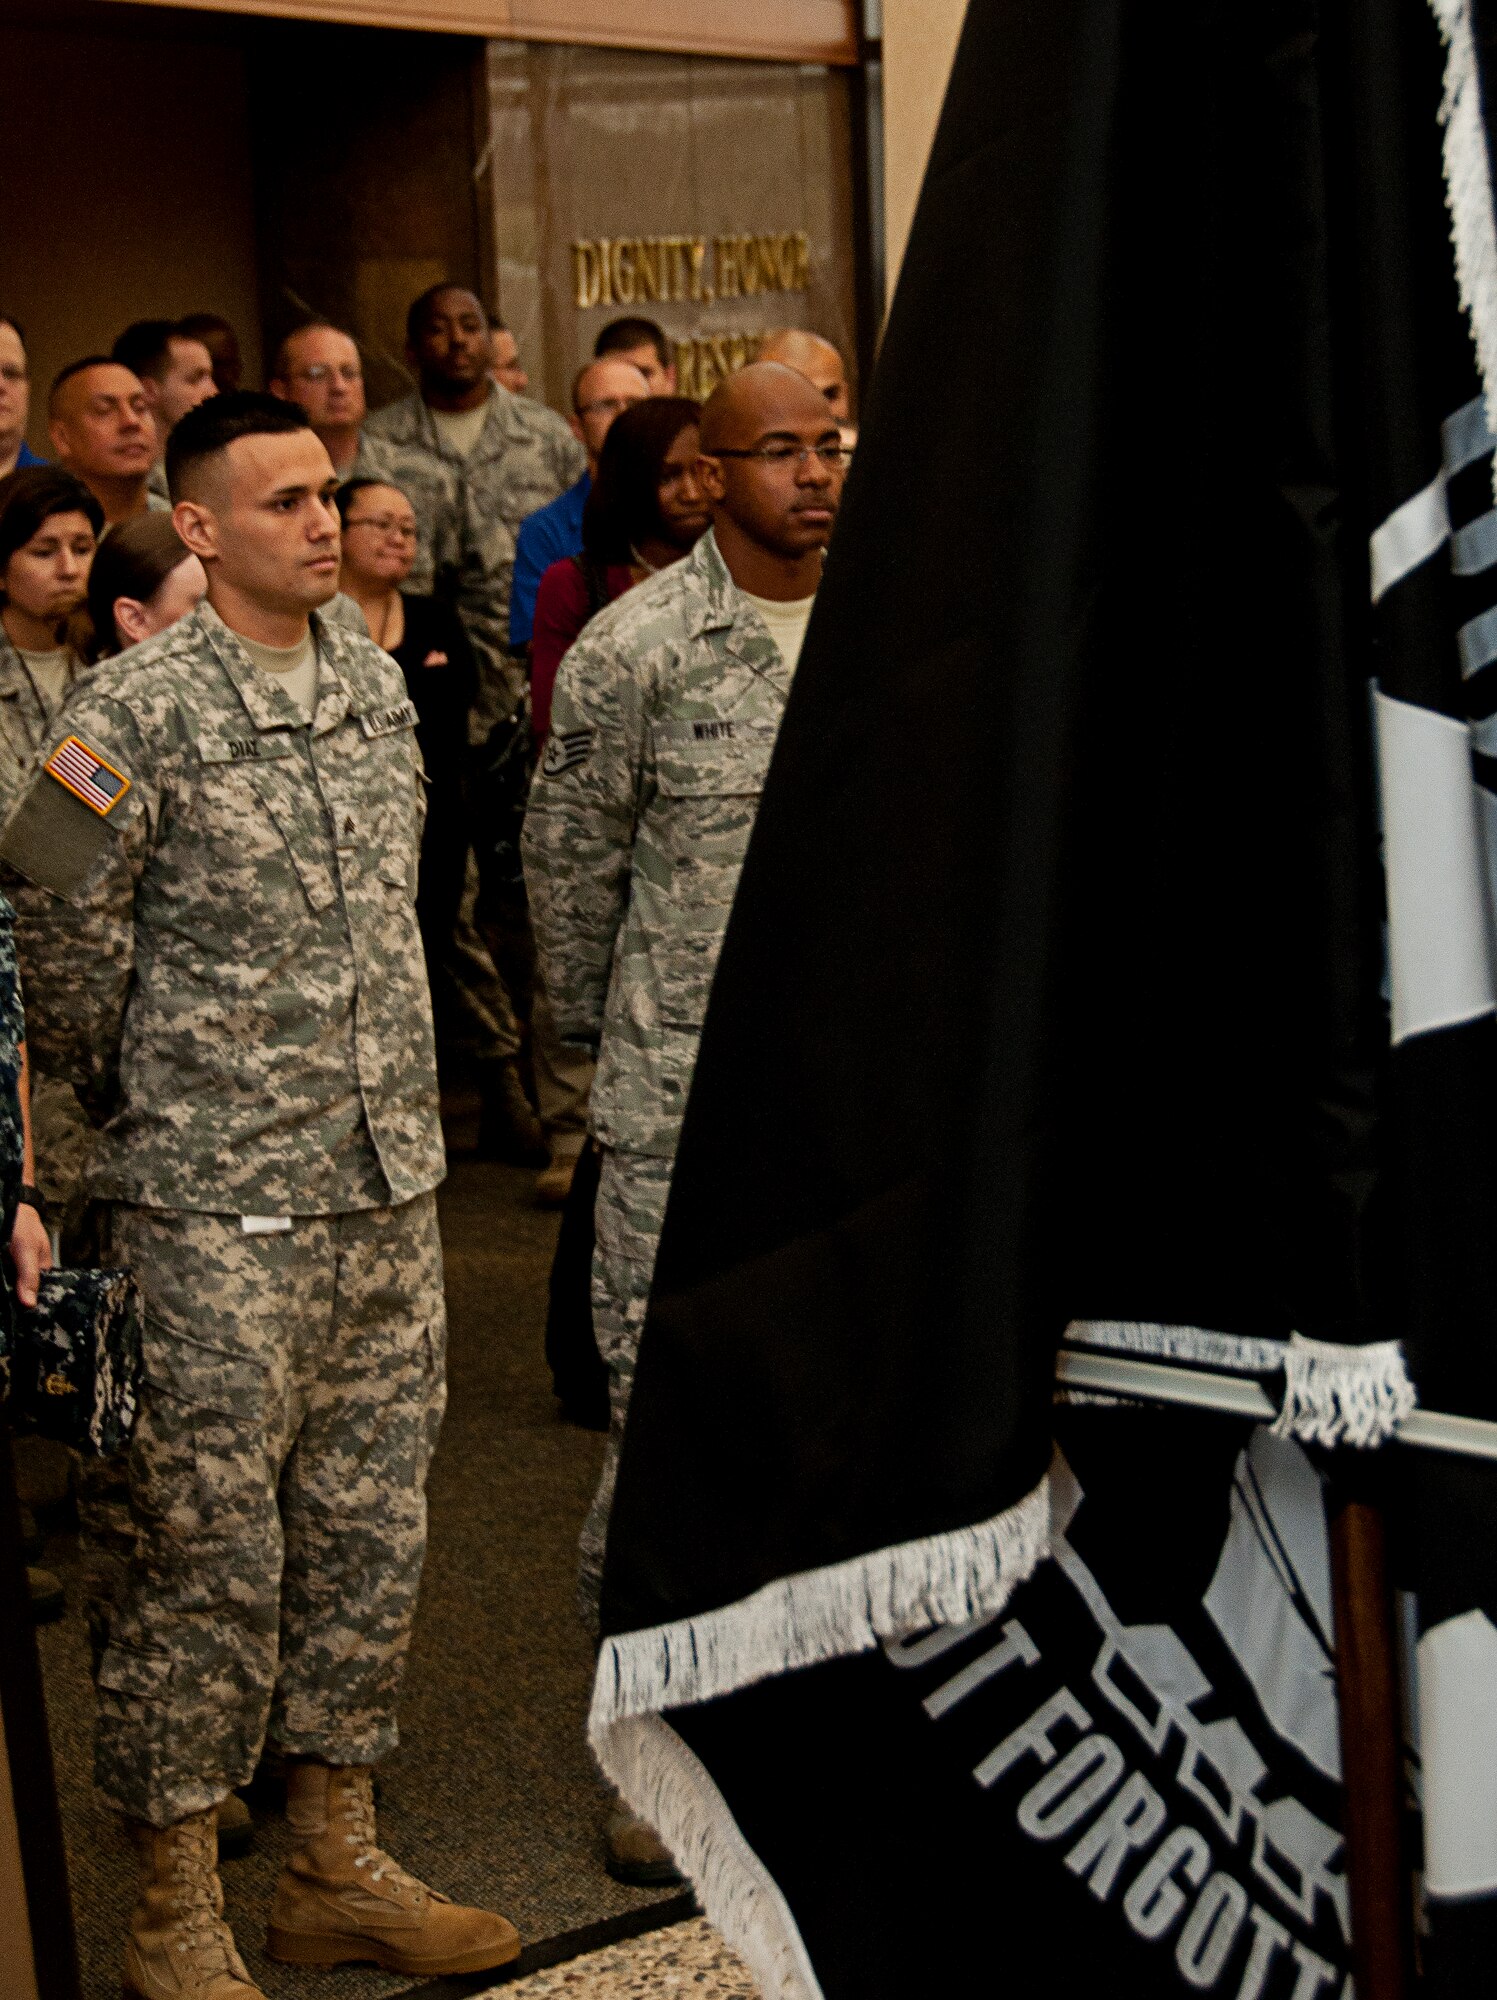 Air Force Mortuary Affairs Operations hosted a Prisoner of War Missing in Action ceremony in remembrance of those who have been POWs or MIA and their families. The AFMAO chapel staff arranged the ceremony for the crowd of about a hundred. (U.S. Air Force photo by Staff Sgt. Augustine G. Salazar)